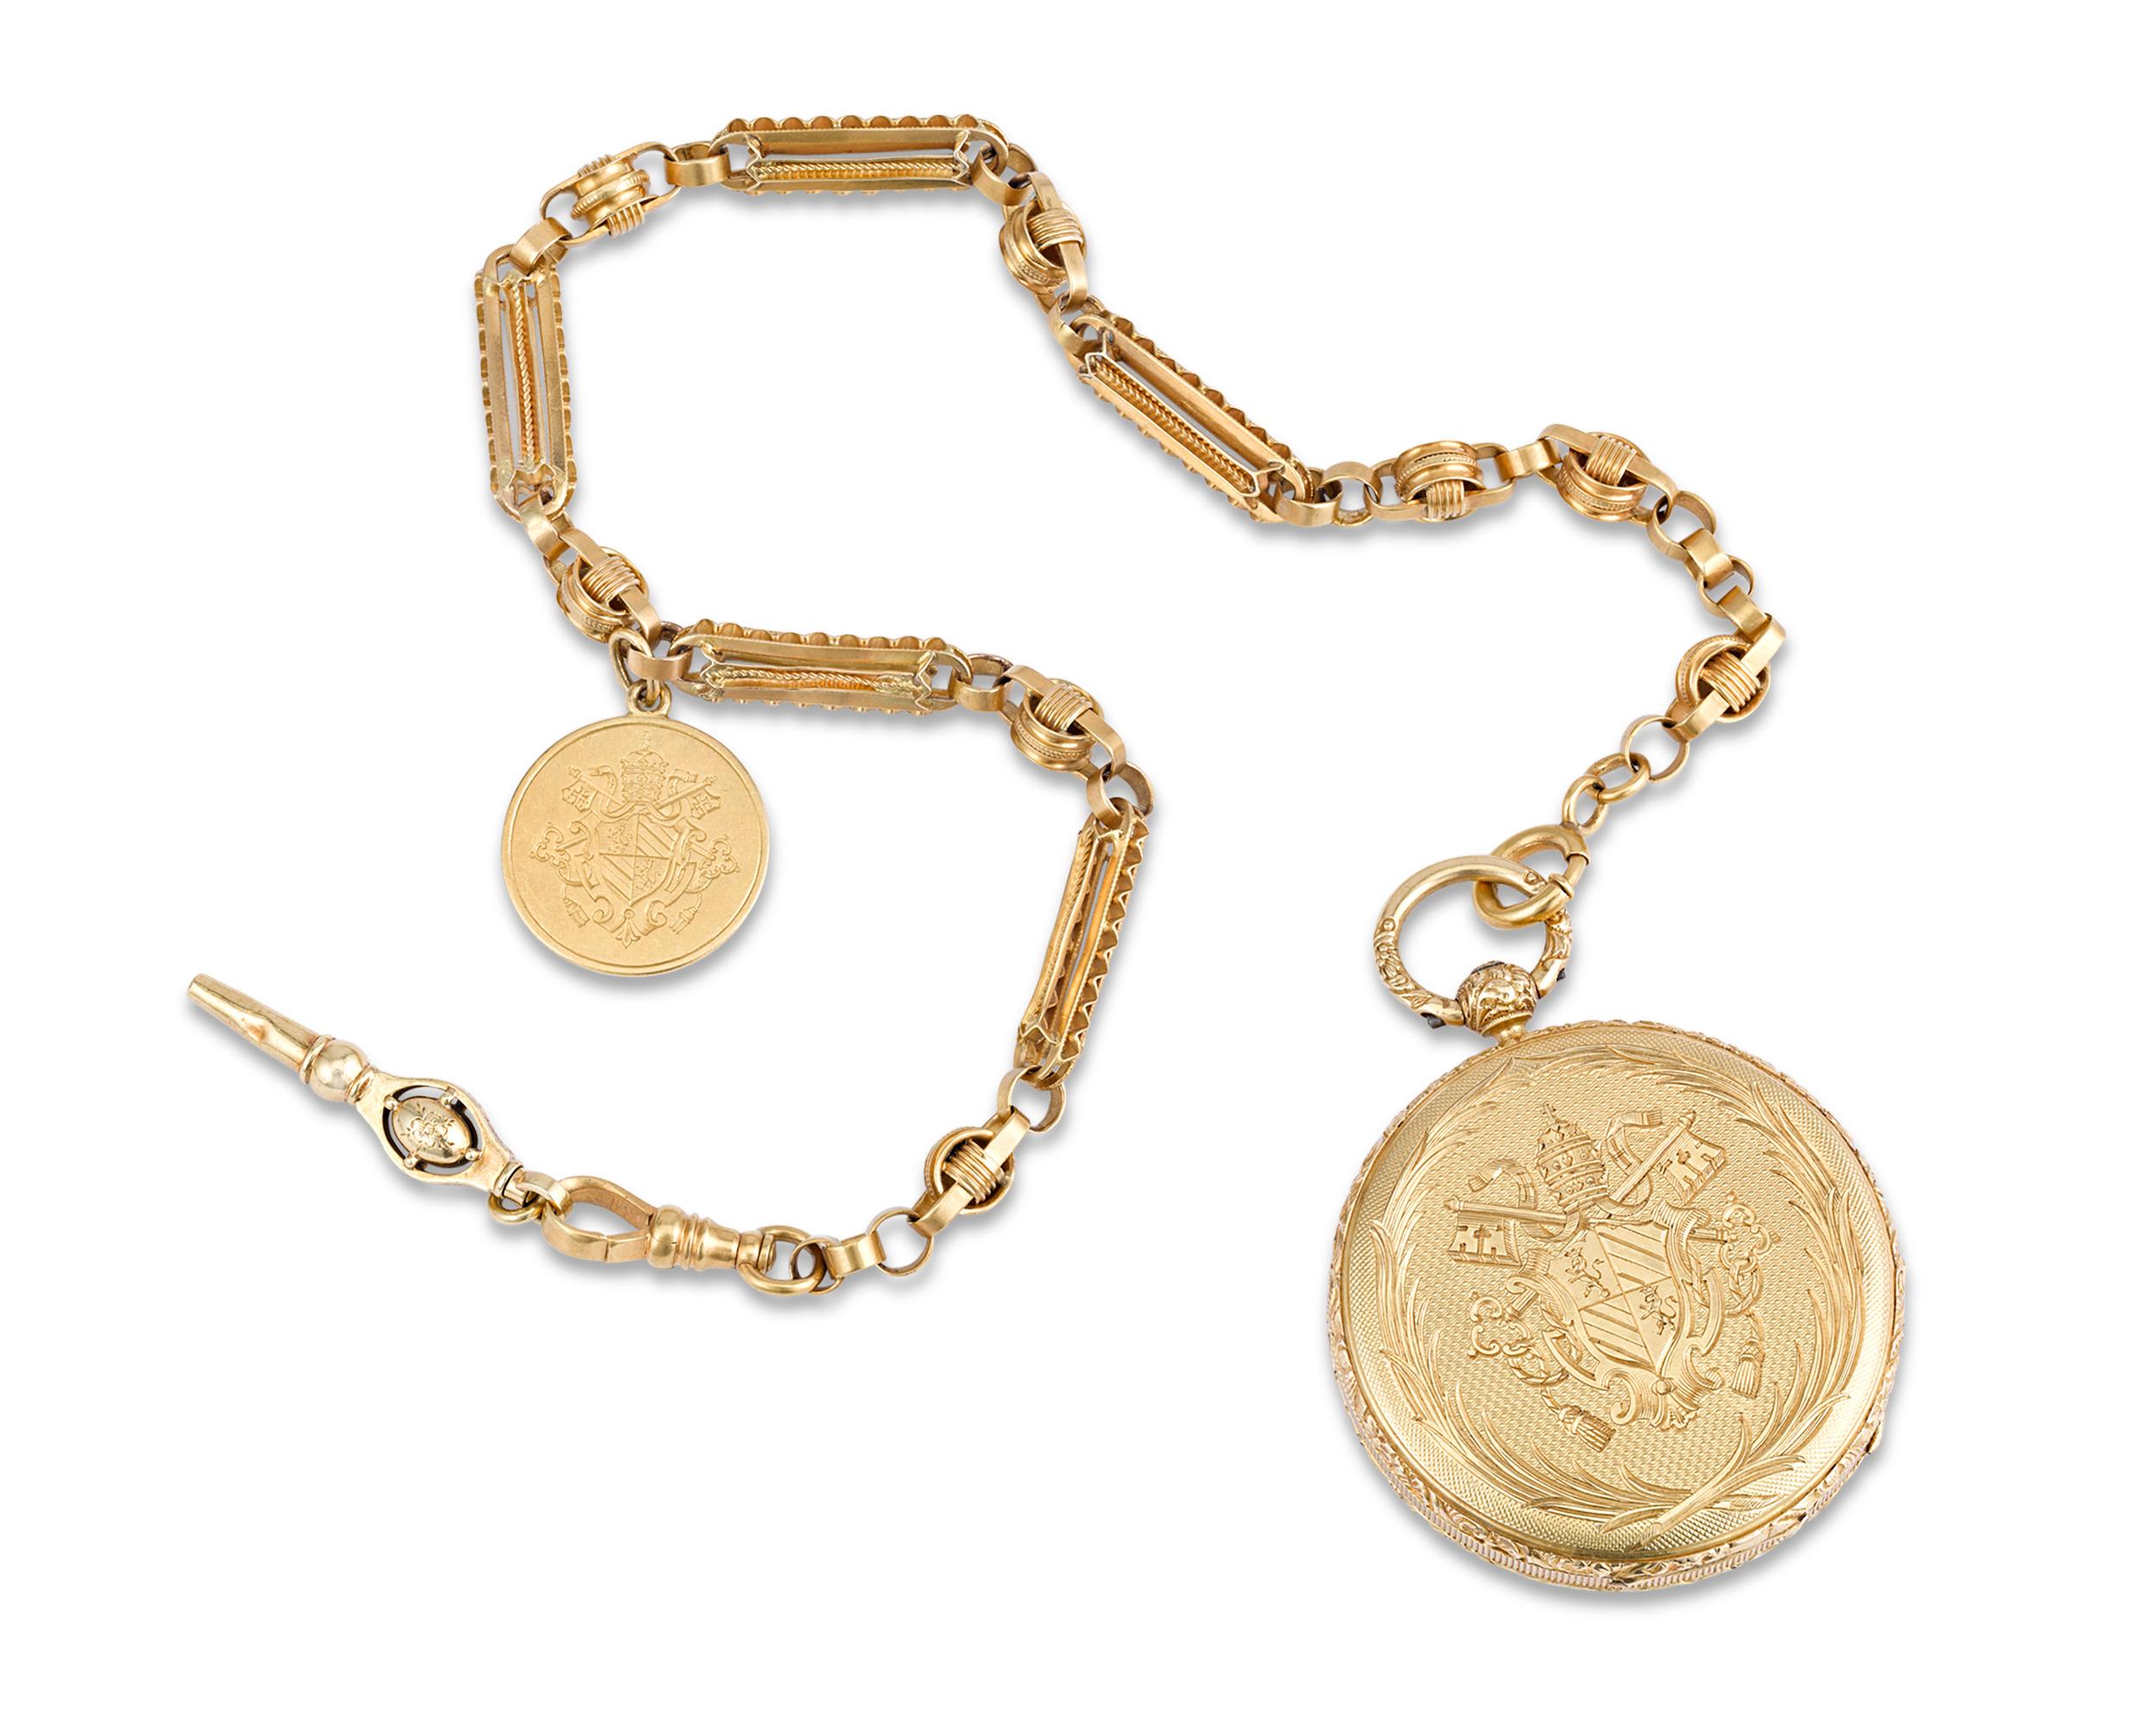 Aesthetic Movement Pope Pius IX Gold Pocket Watch by Aucoc